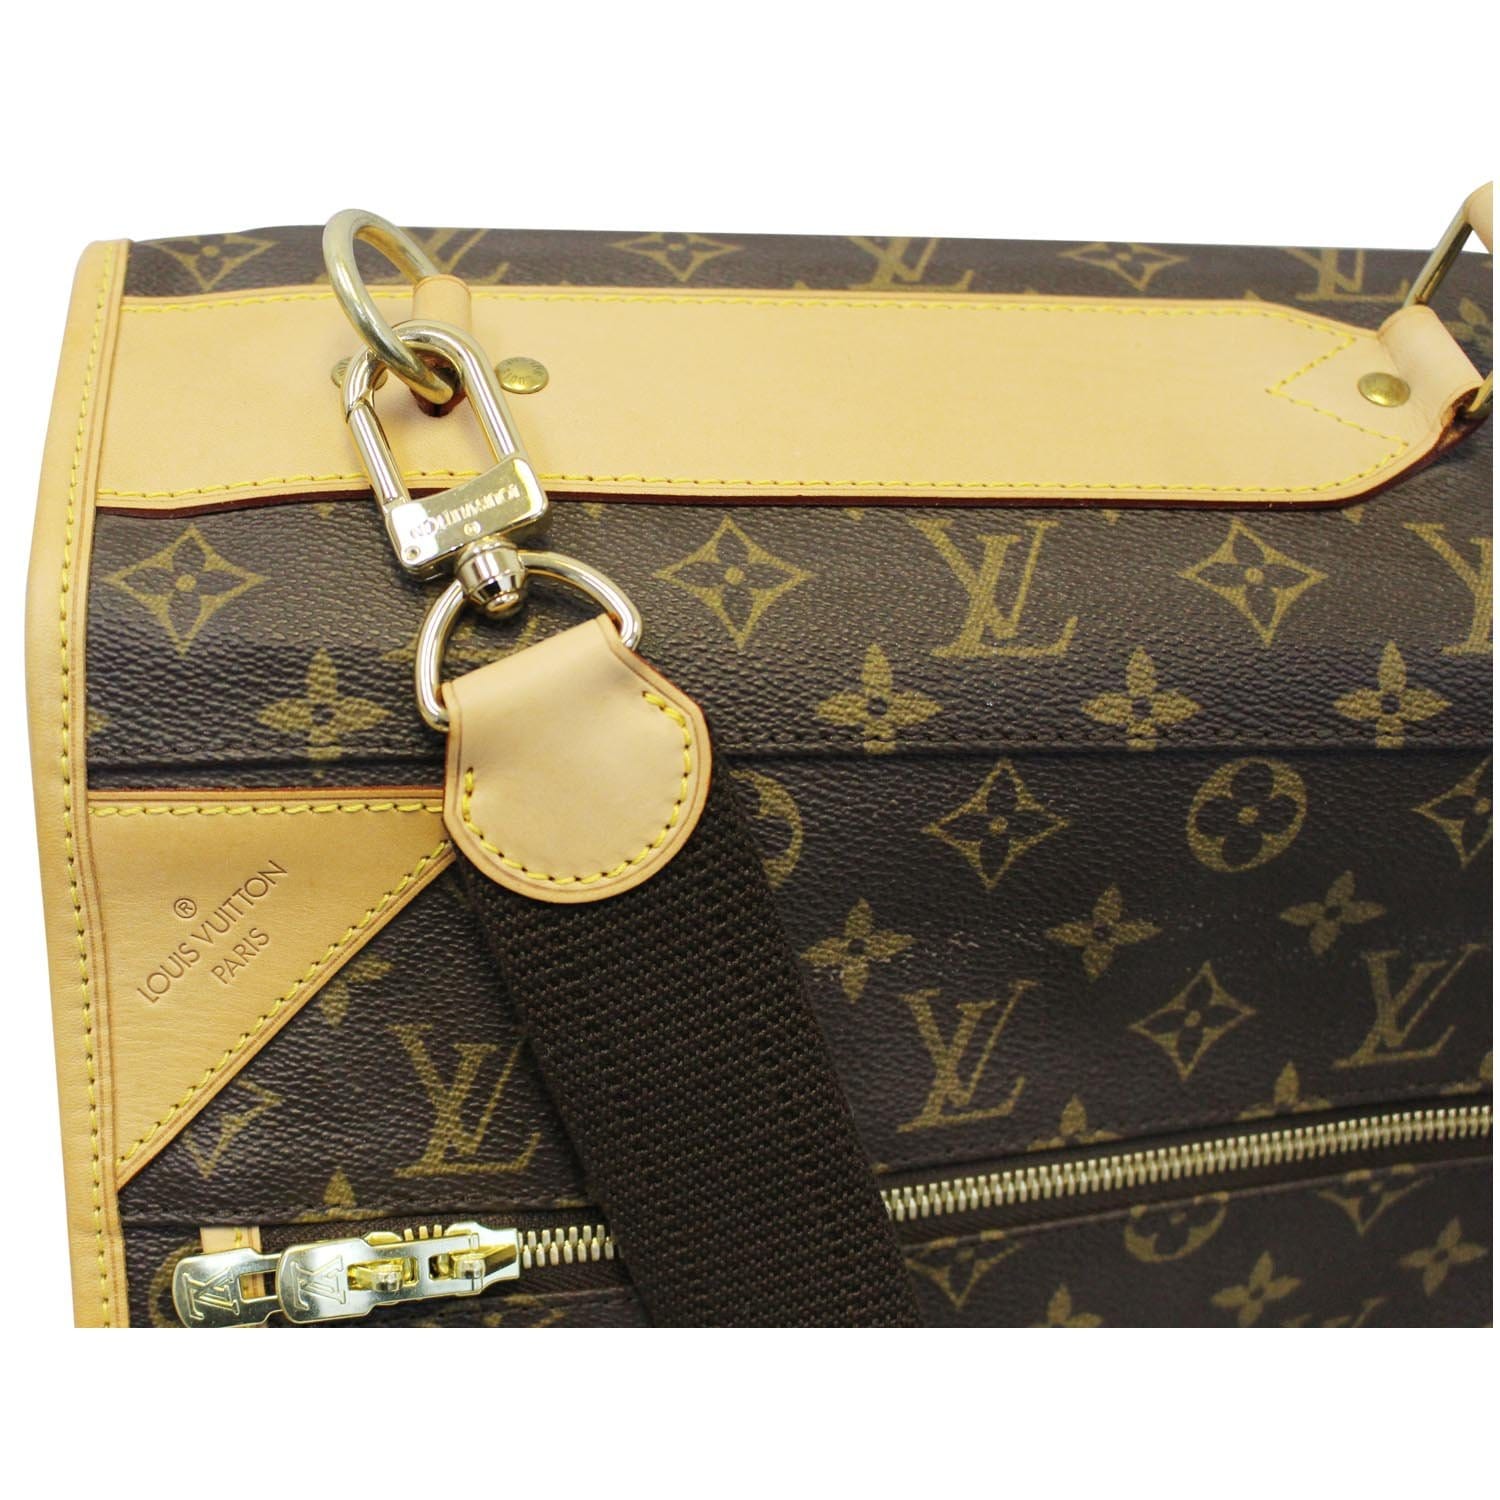 Brand new Louis Vuitton garment bag with 5 hangers - Pinth Vintage